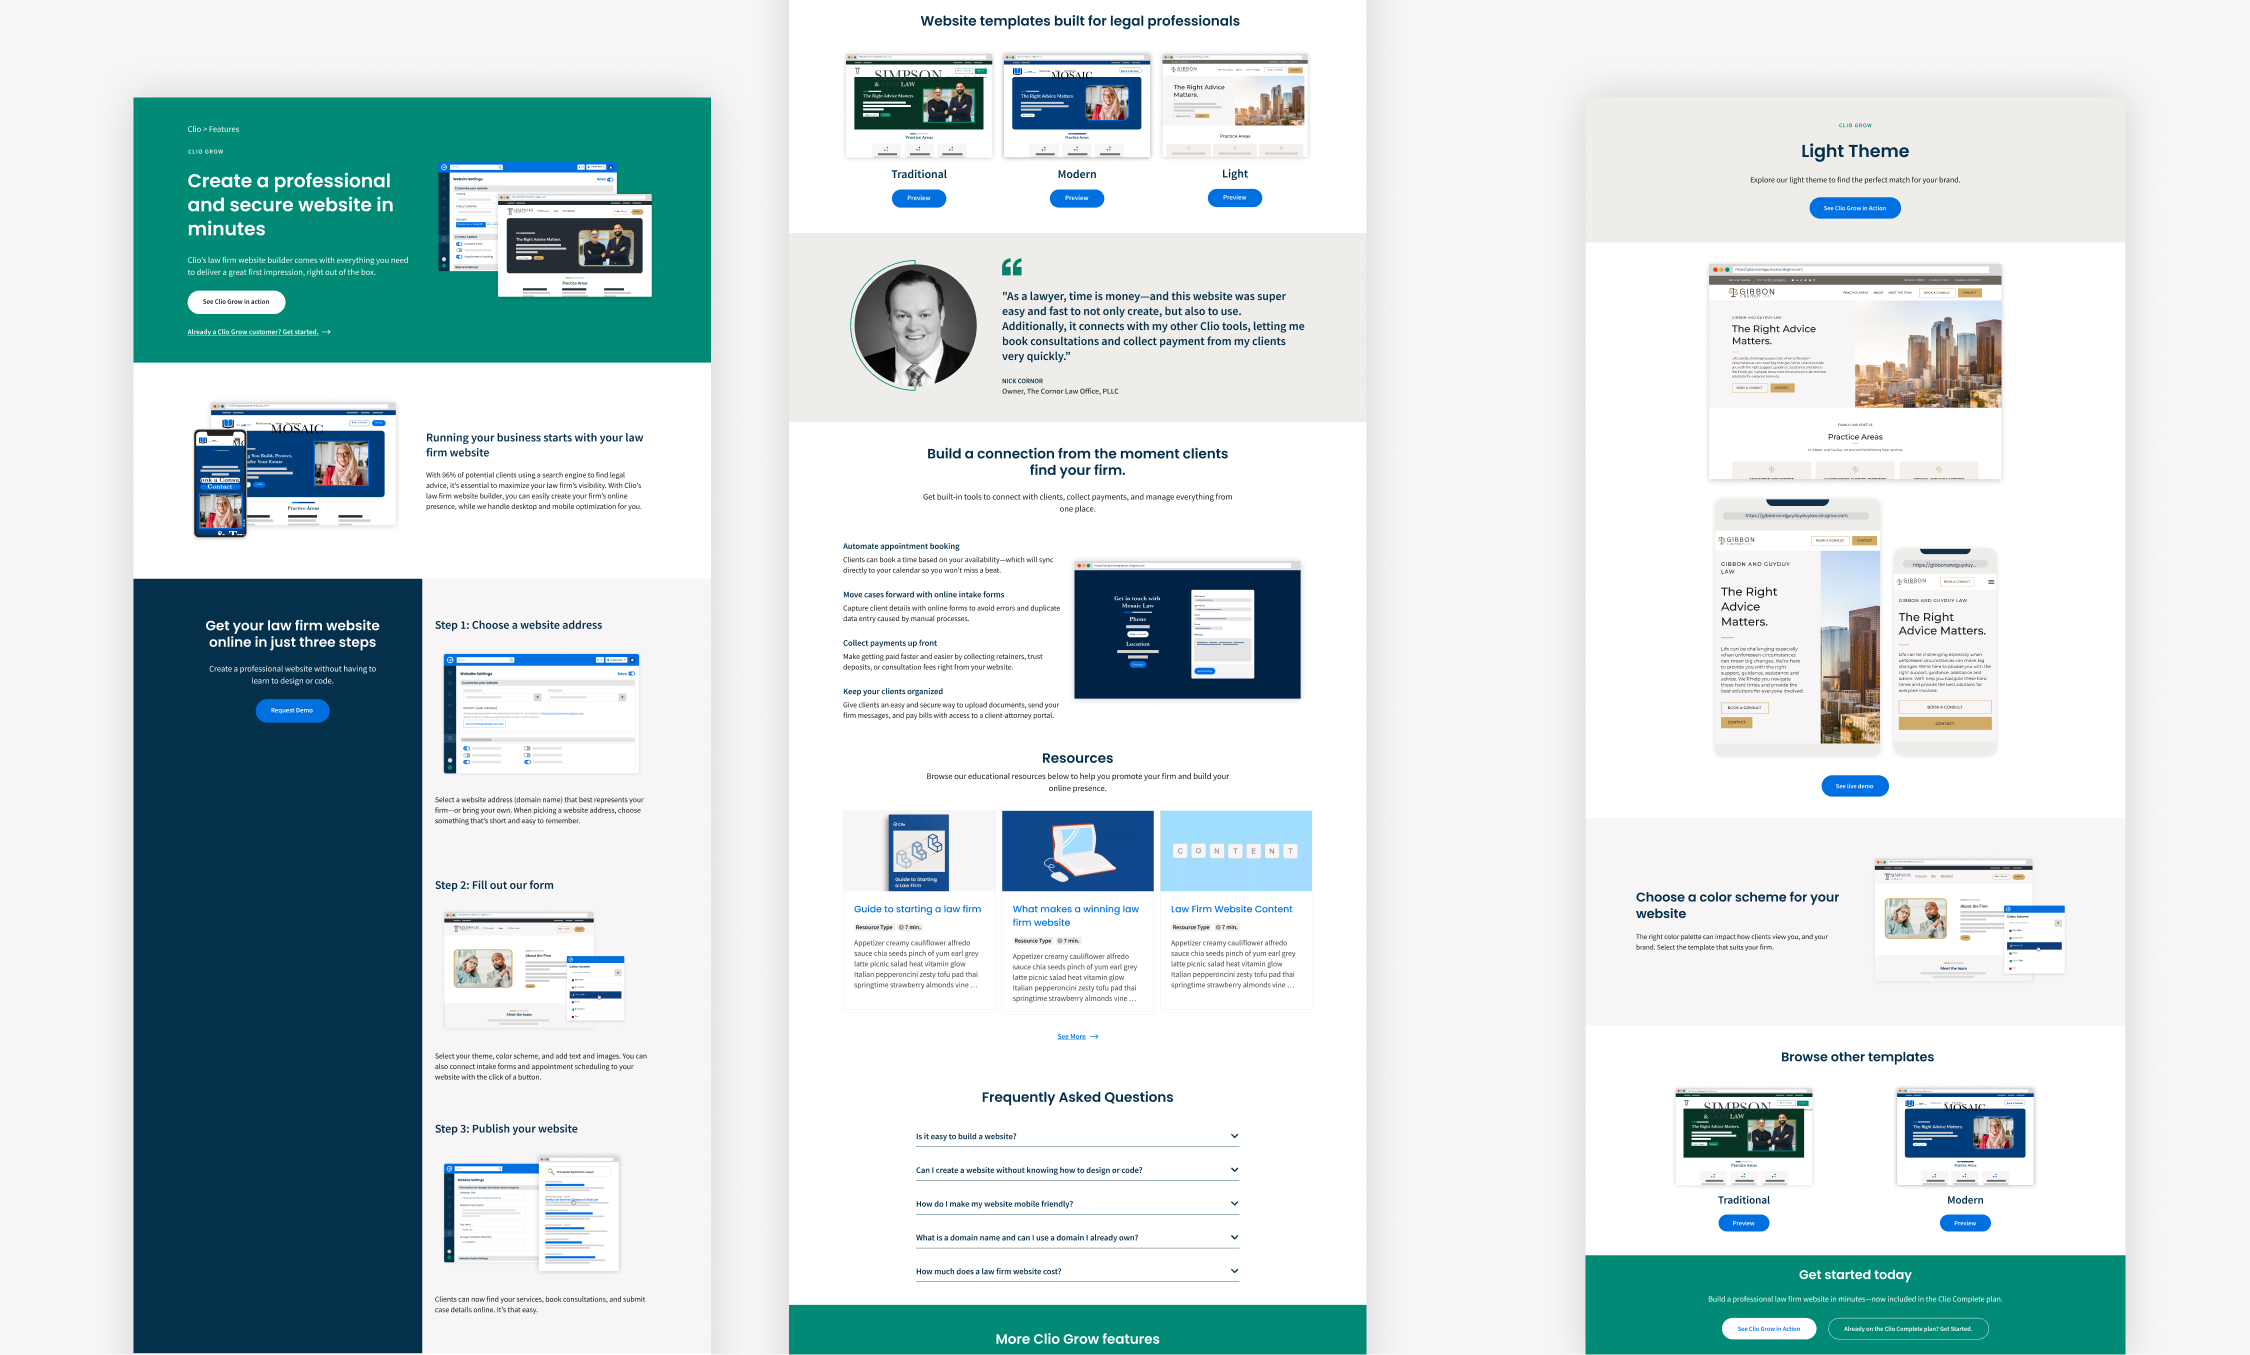 On the left is the website builder feature page and on the right is the theme specific page.